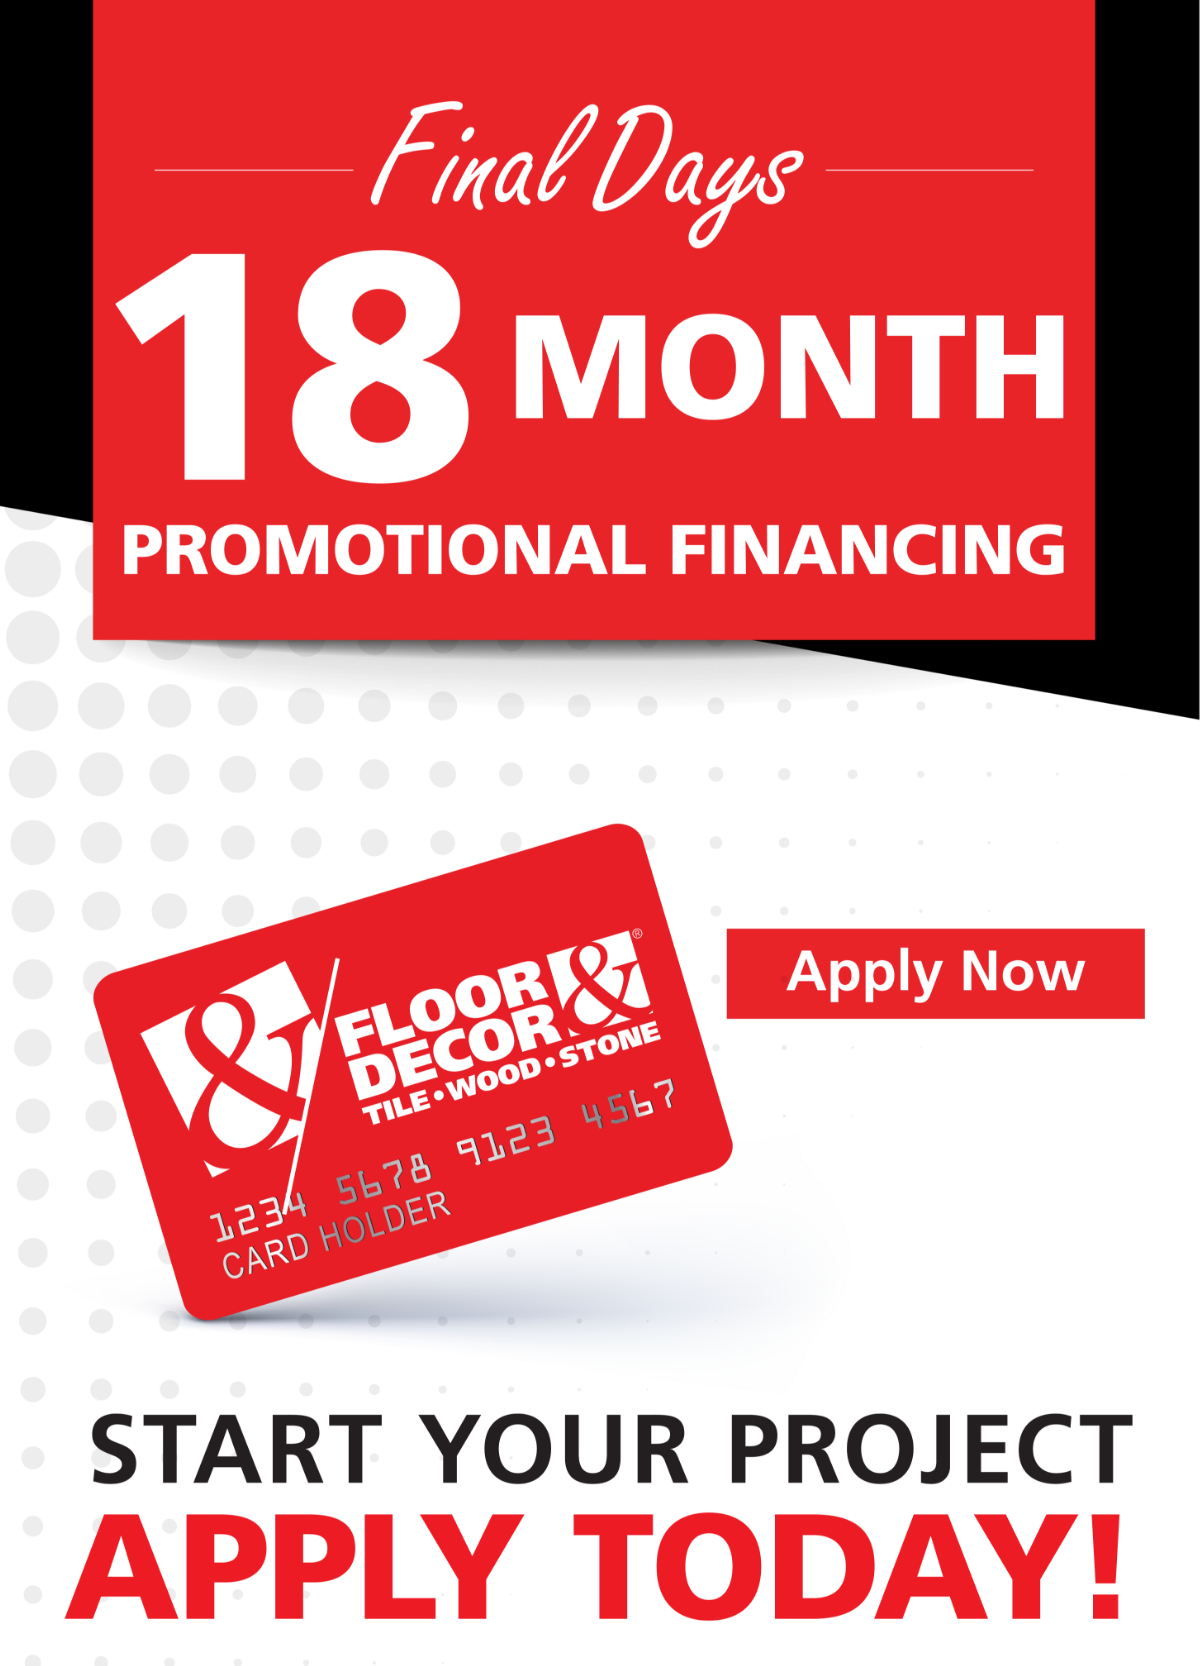 Floor & Decor: Final Days! Apply for 18 Month Promotional Financing. |  Milled